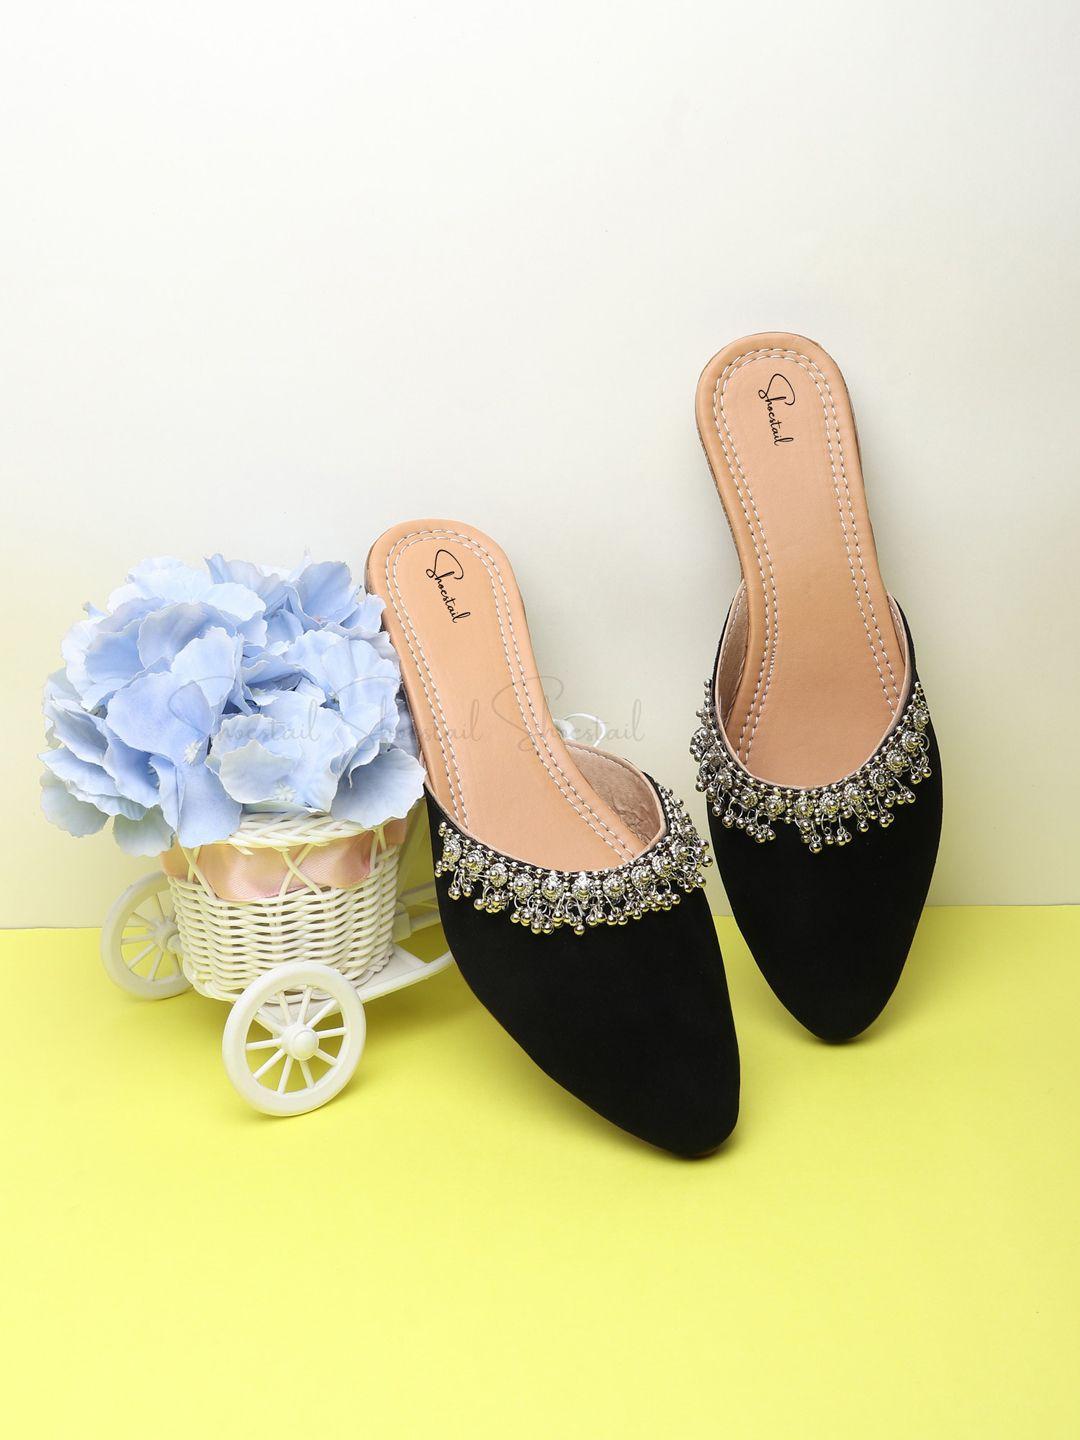 shoestail pointed toe embellished mules flats